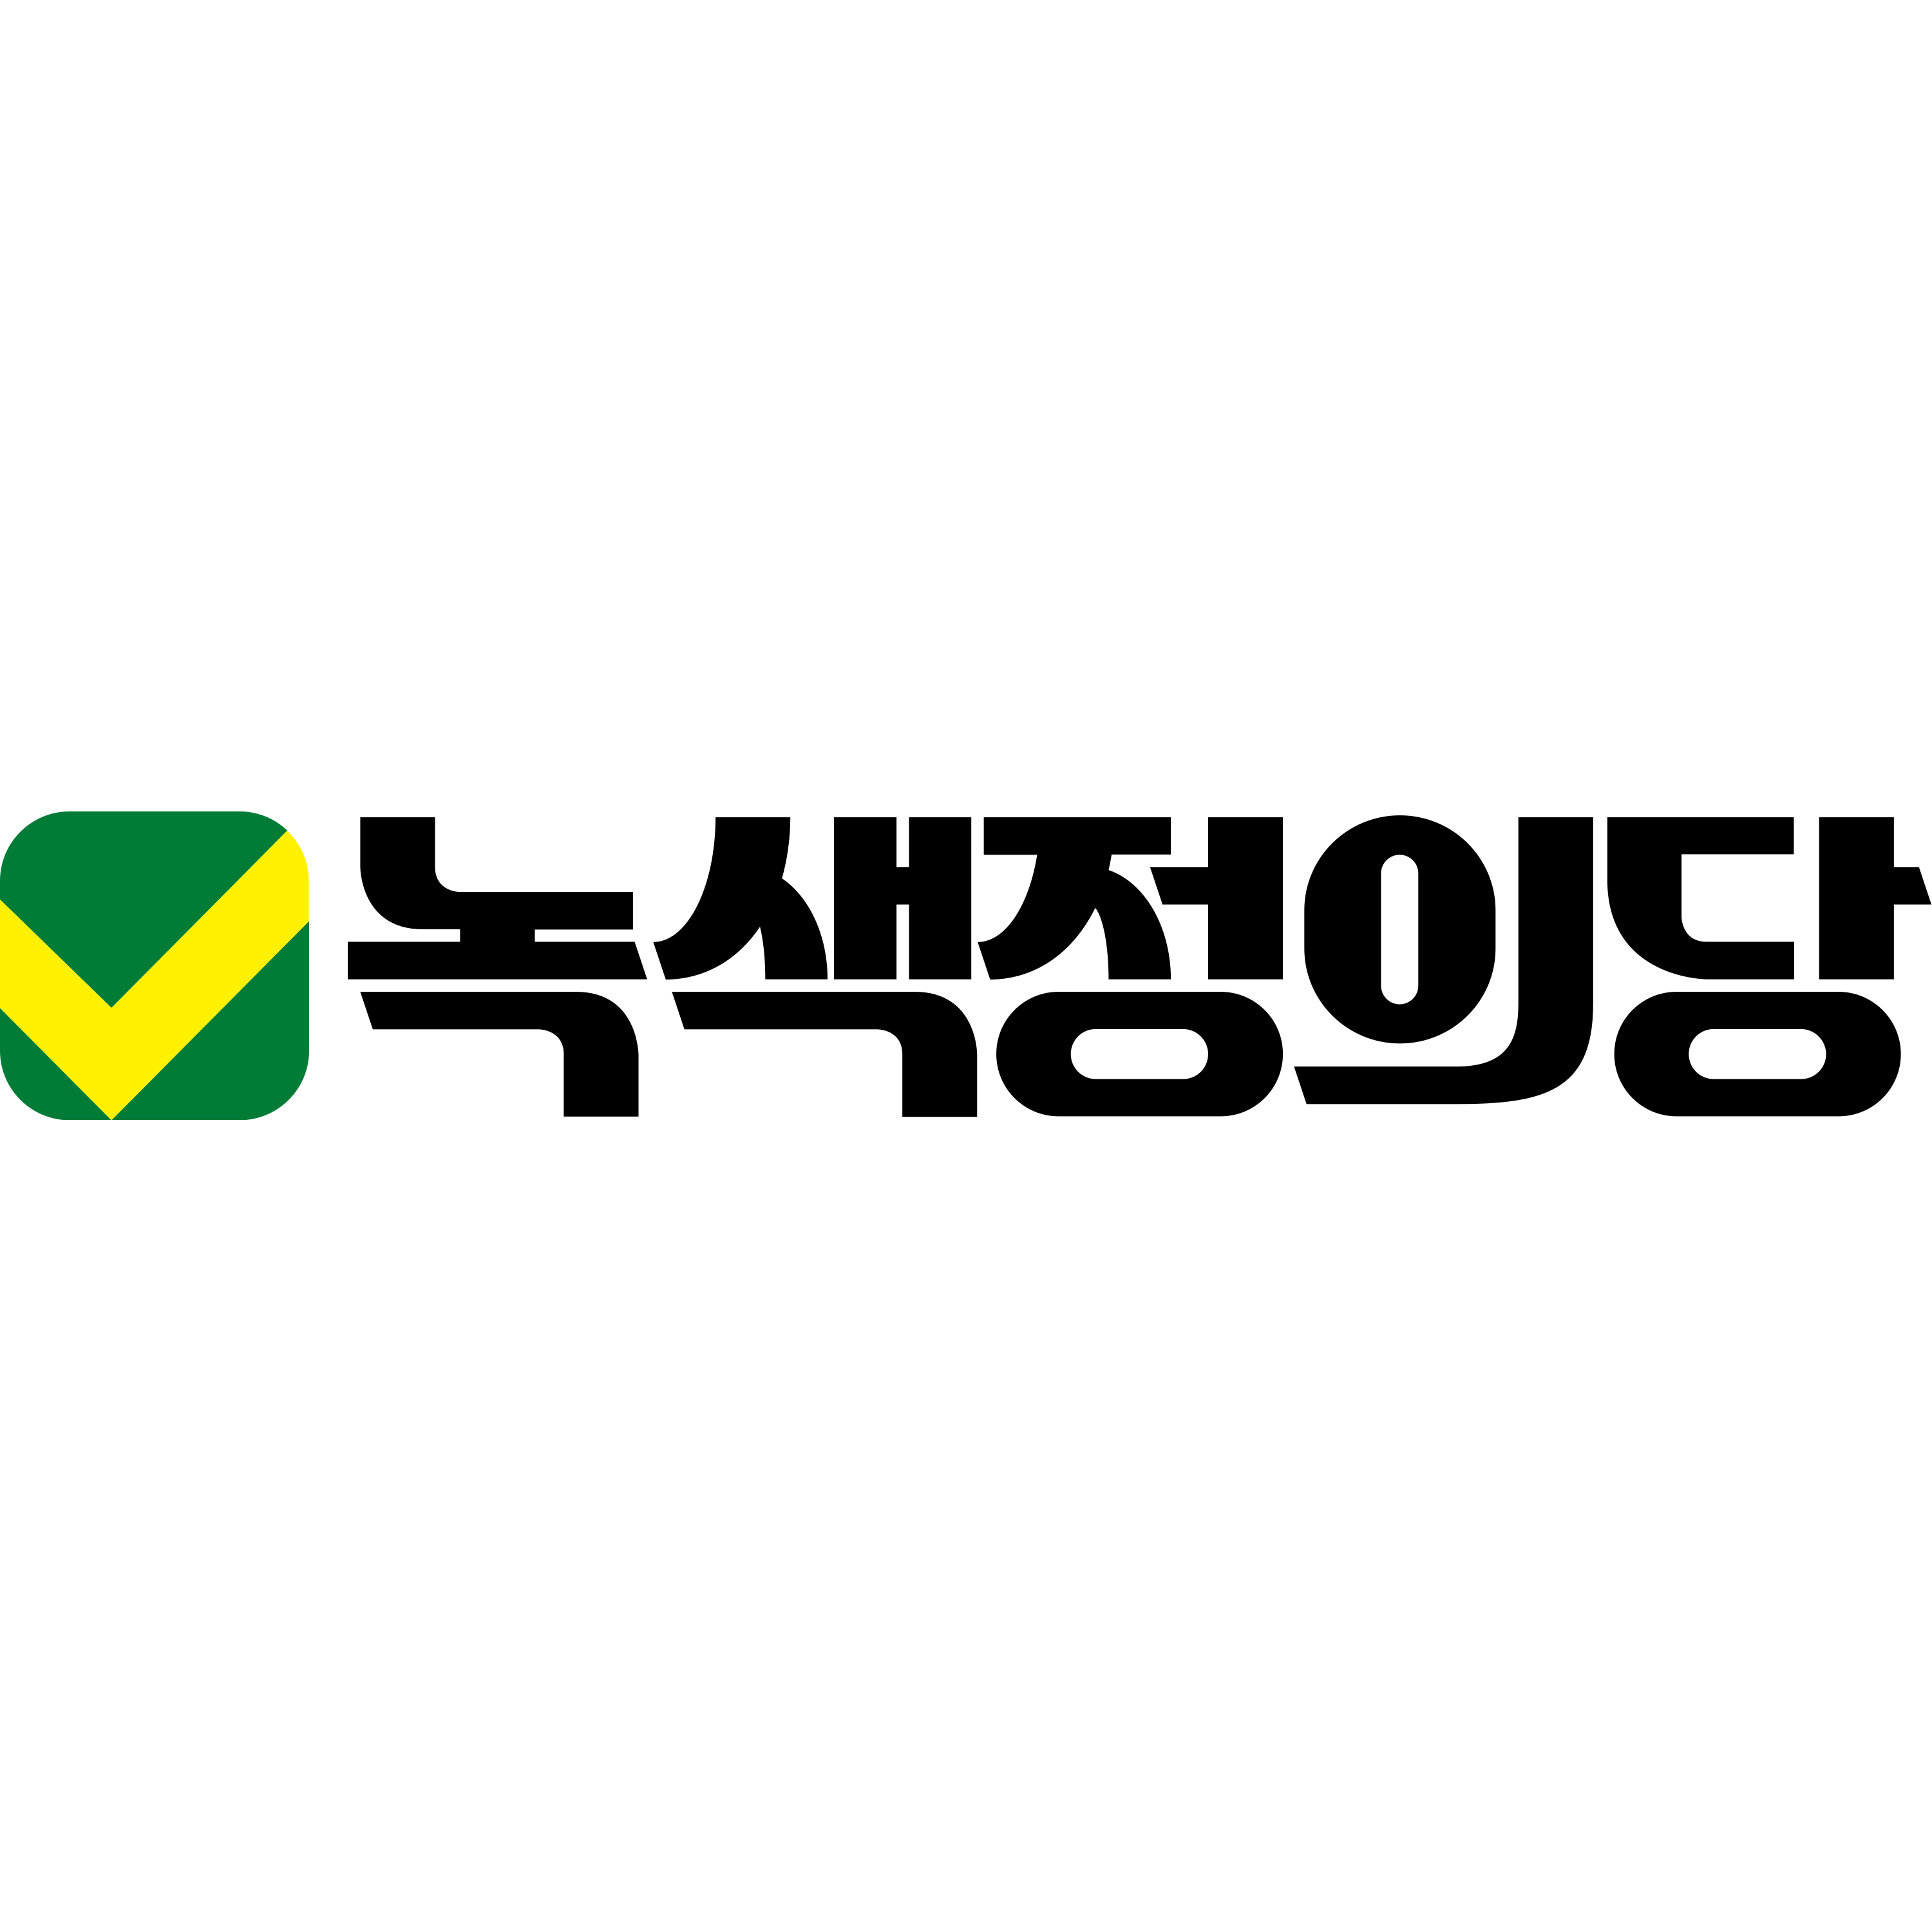 Green Justice Party Logo  Transparent Image